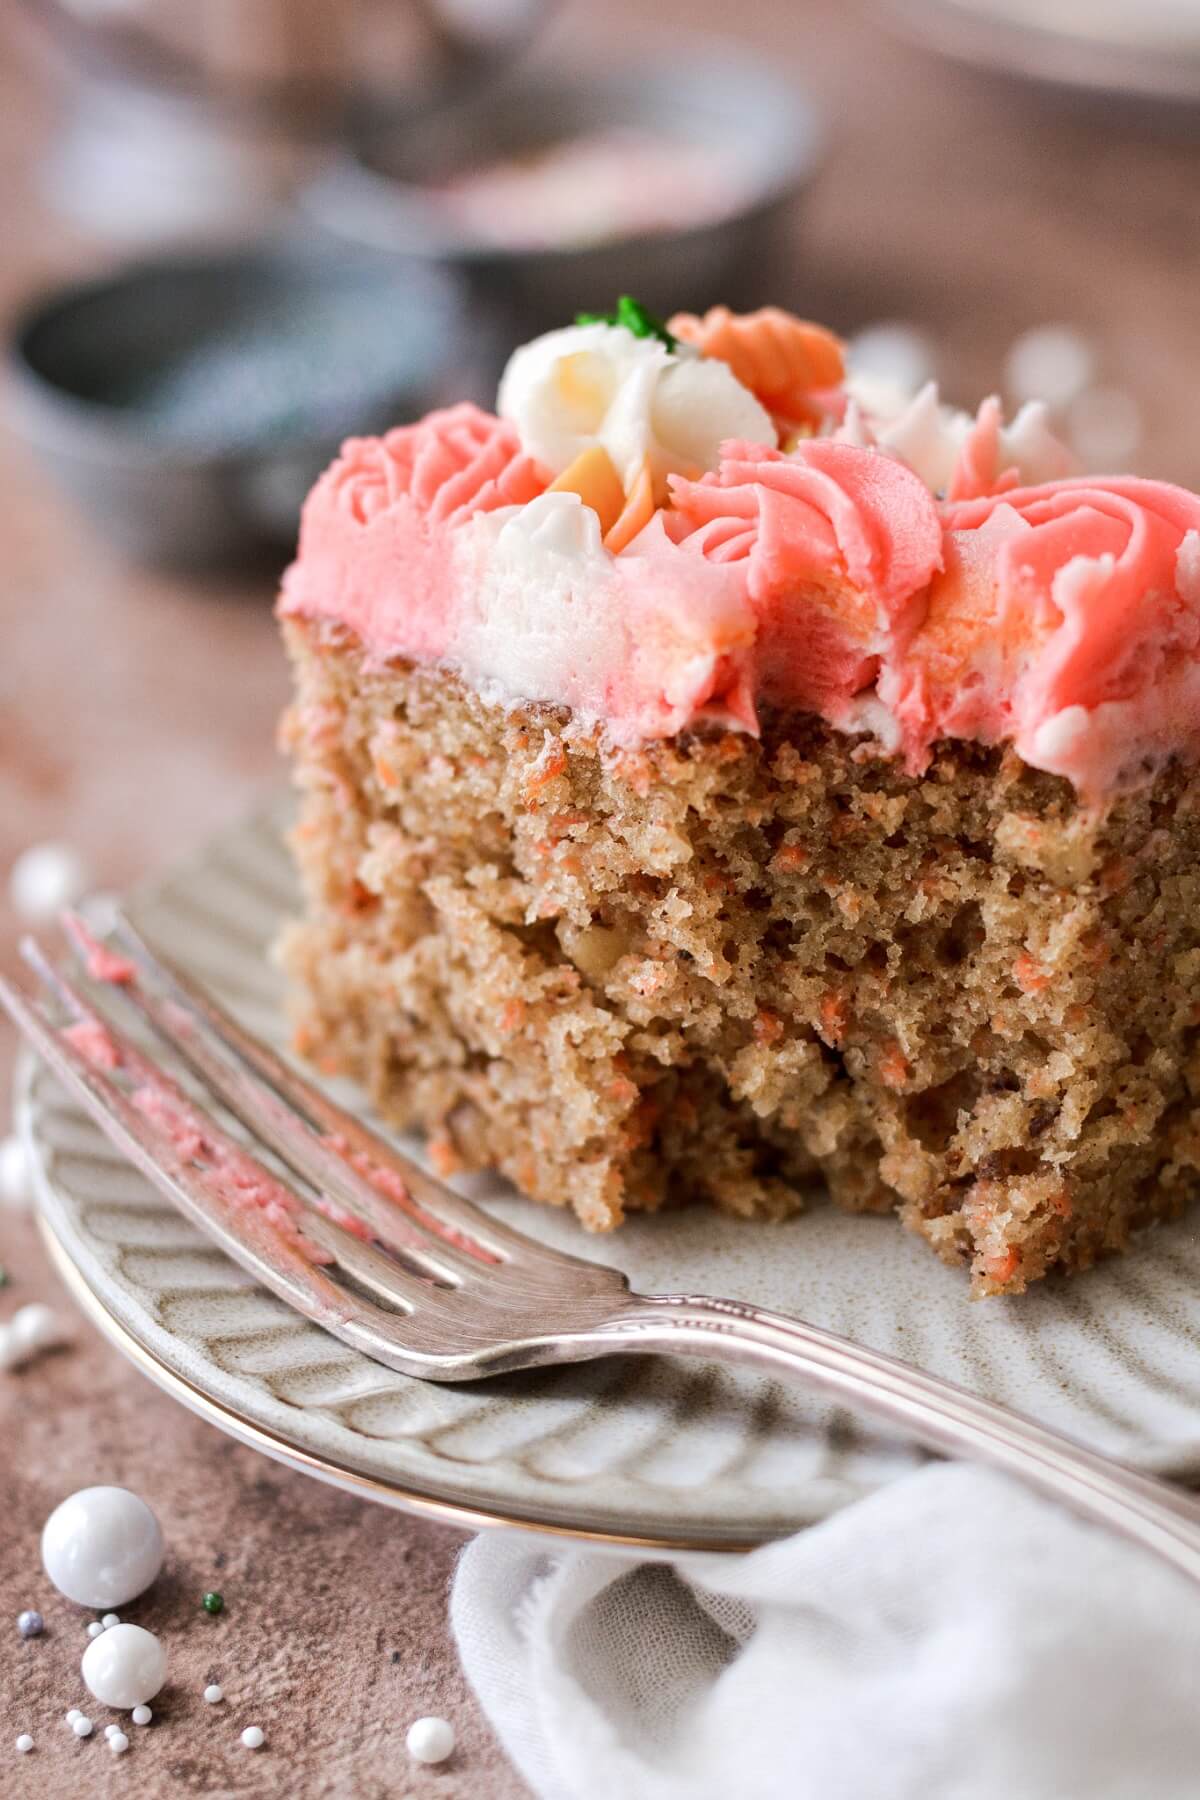 A piece of carrot cake with a bite taken.